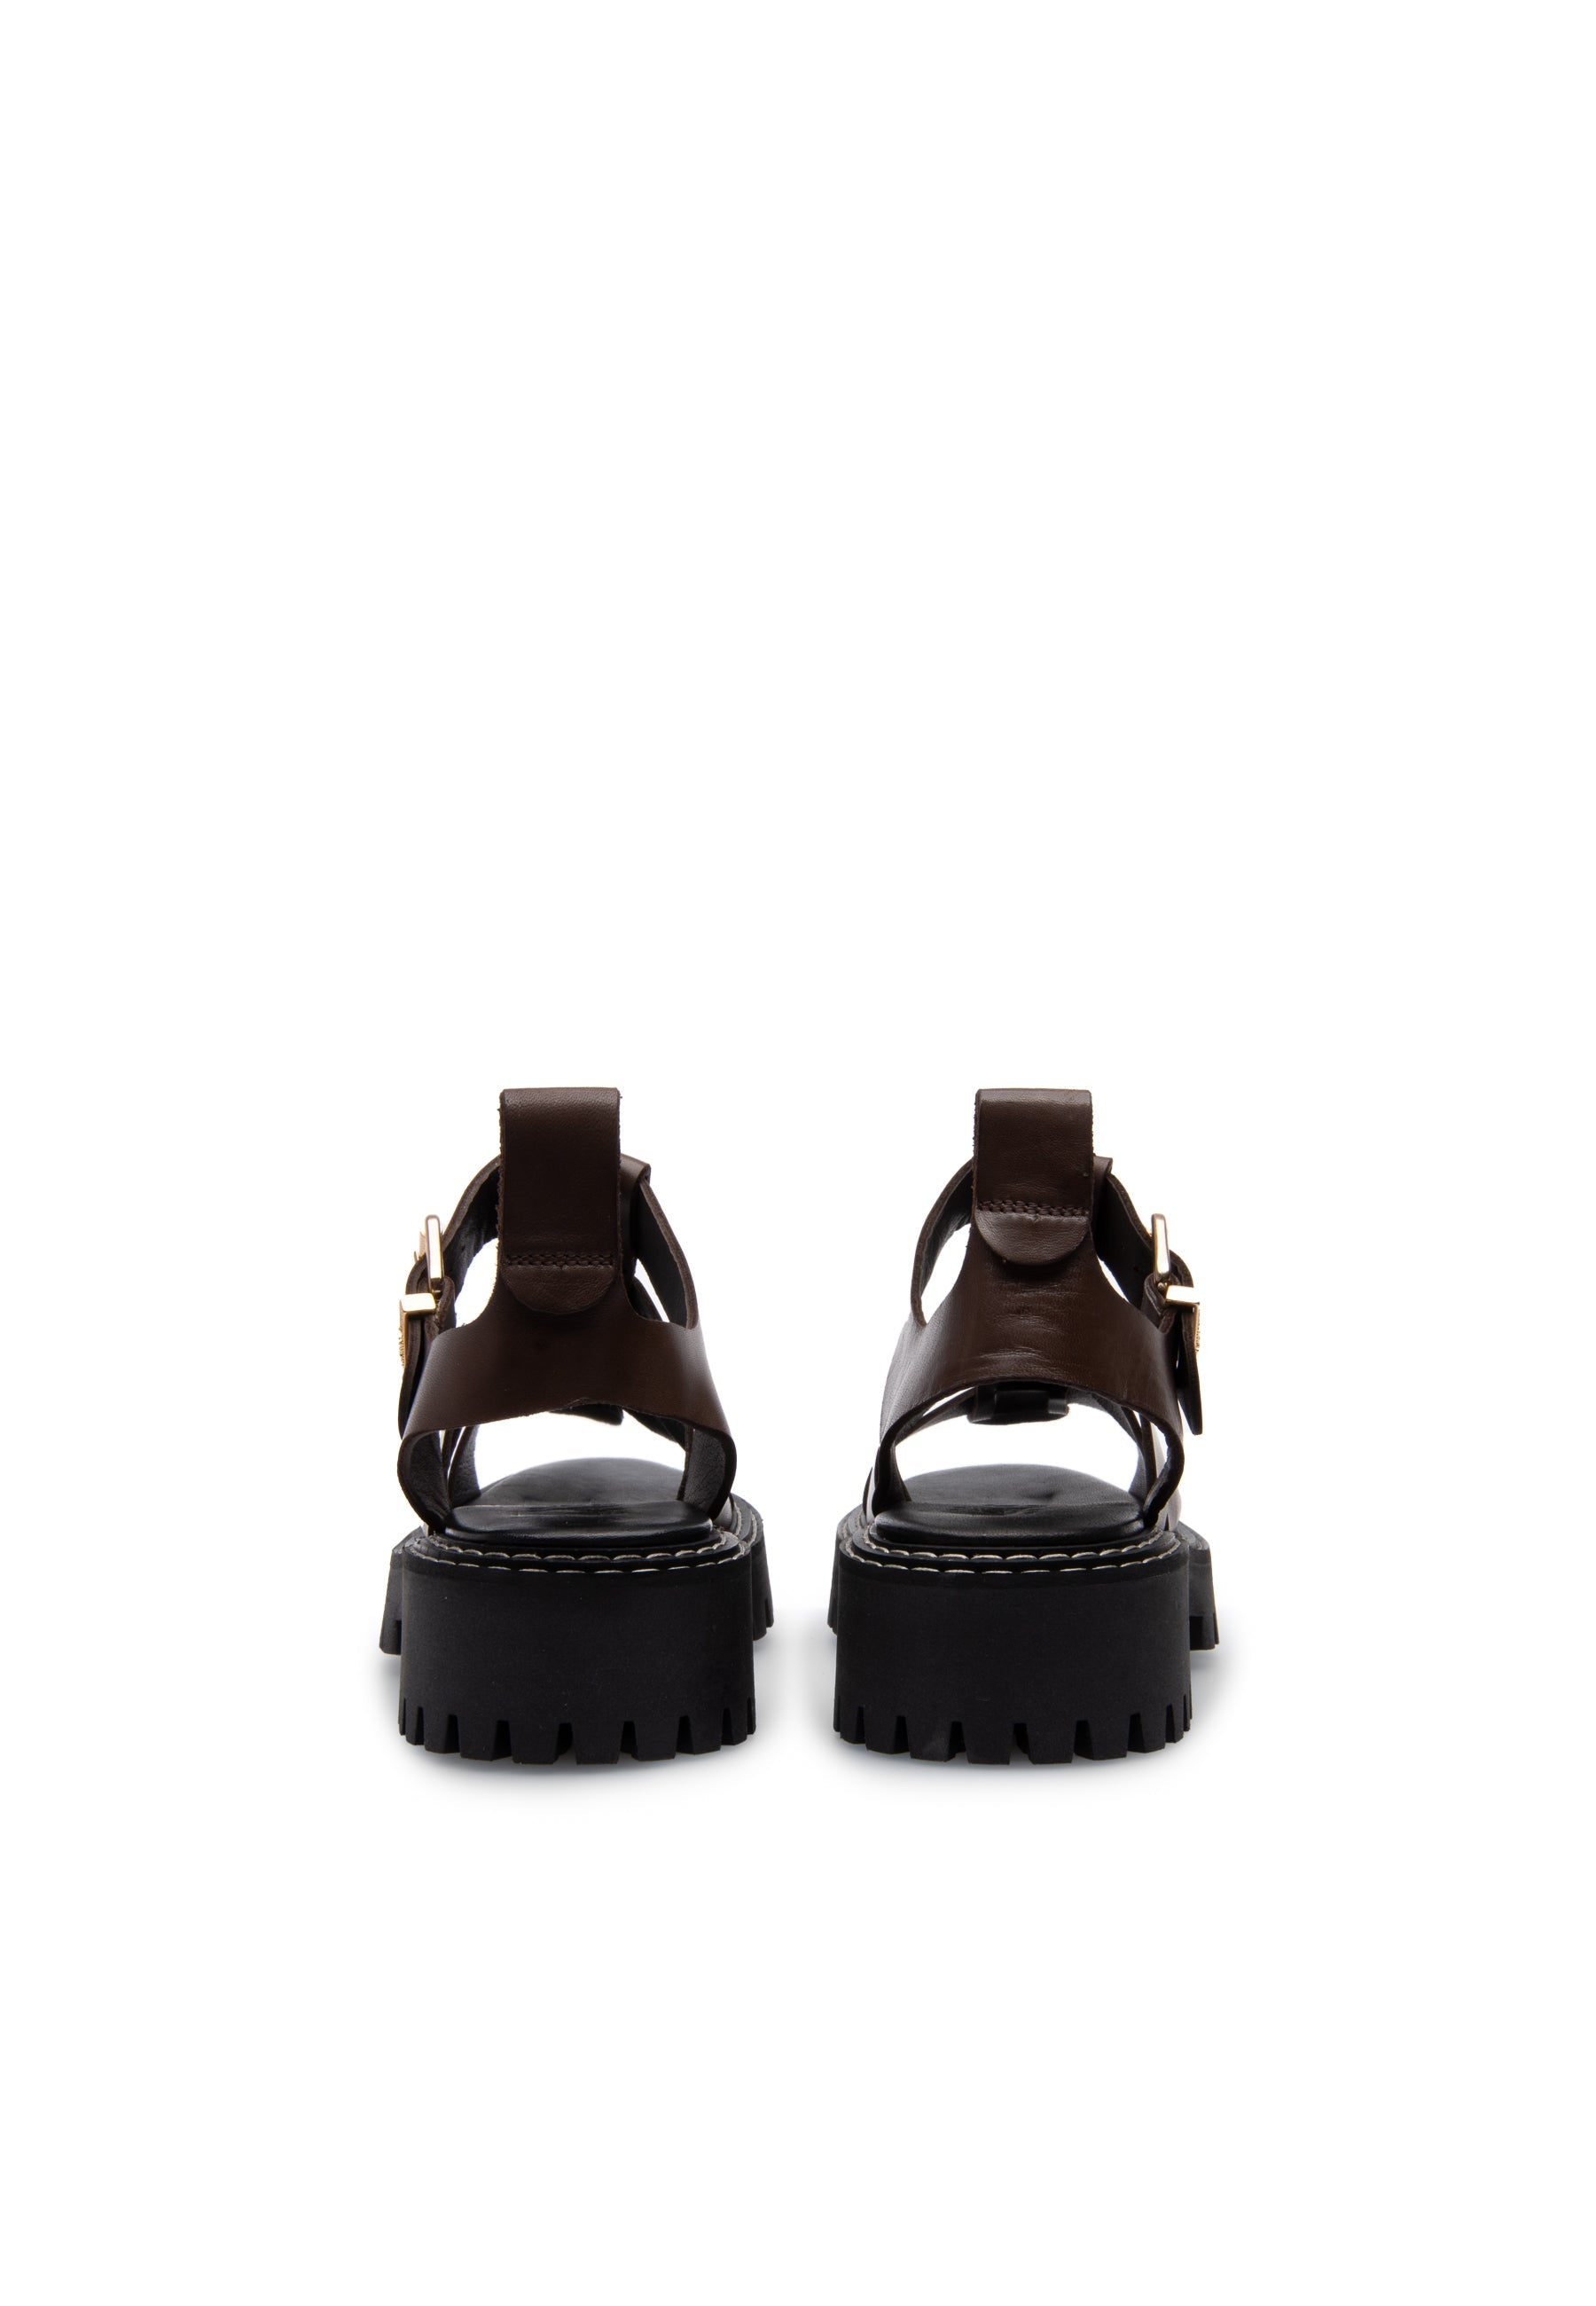 Daphny Brown Leather Chunky Sandals LAST1519 - 5